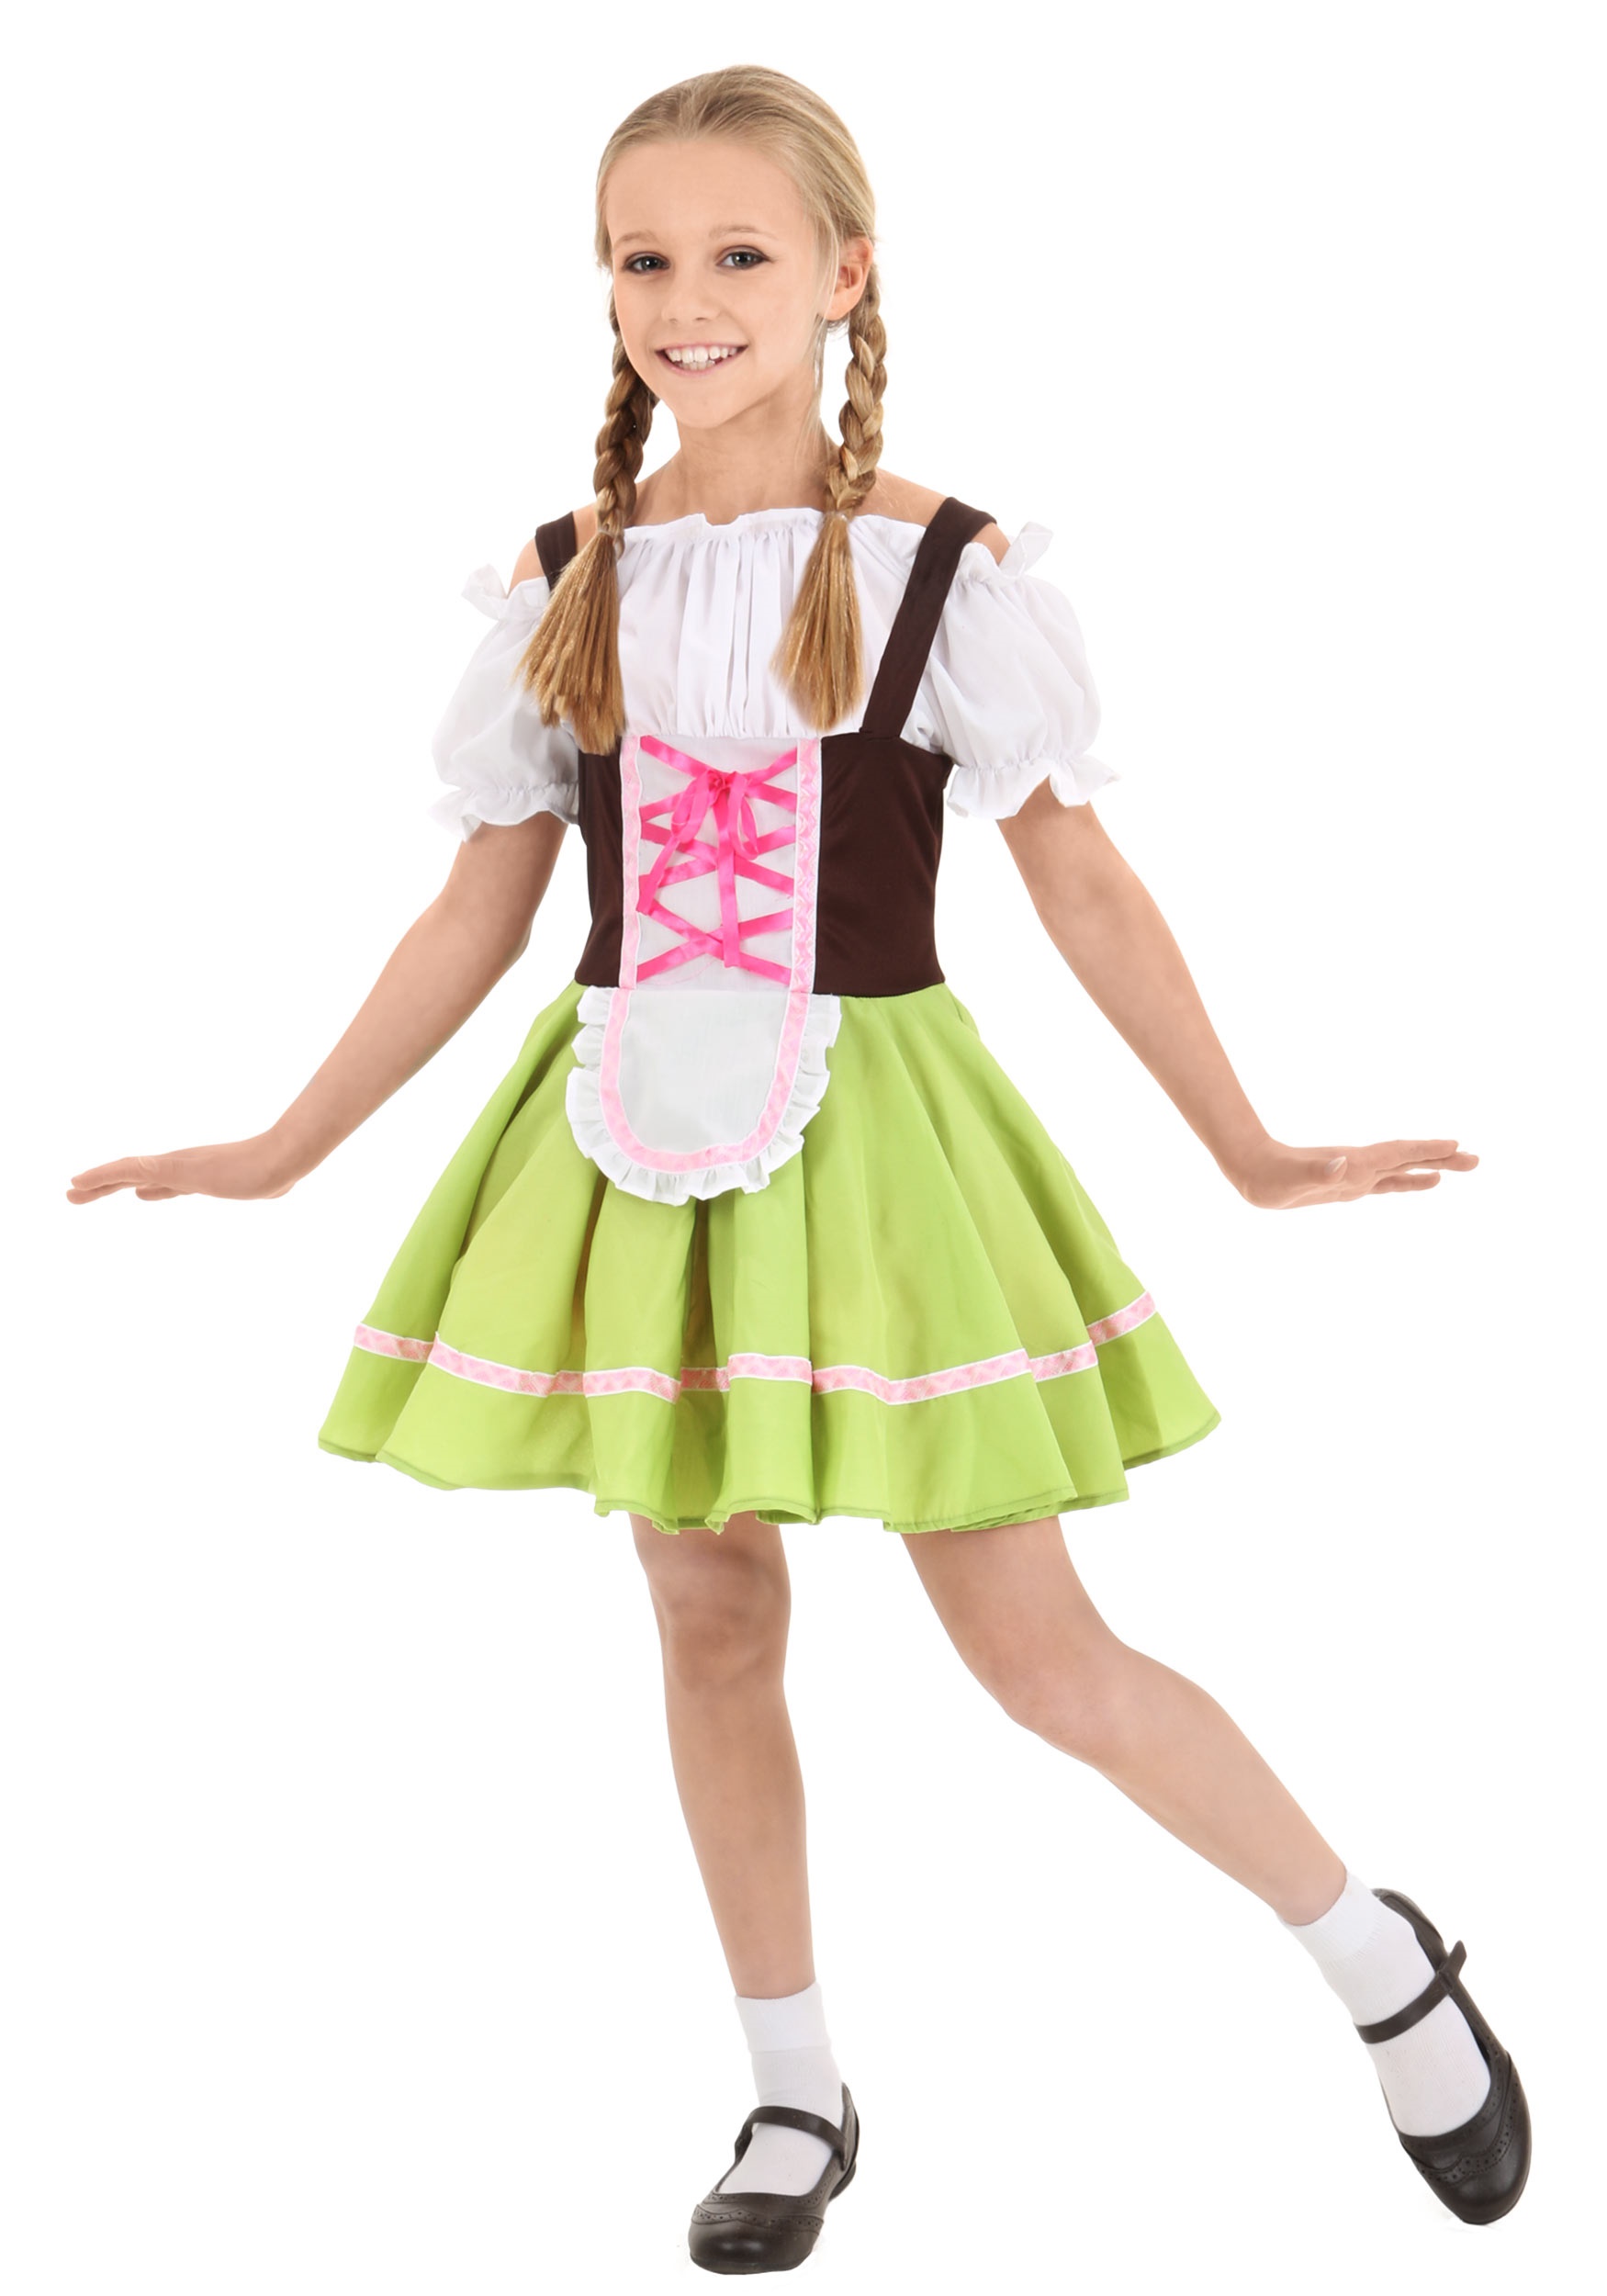 Photos - Fancy Dress GERMAN FUN Costumes  Girl Costume for a Child Brown/Green/White FUN 